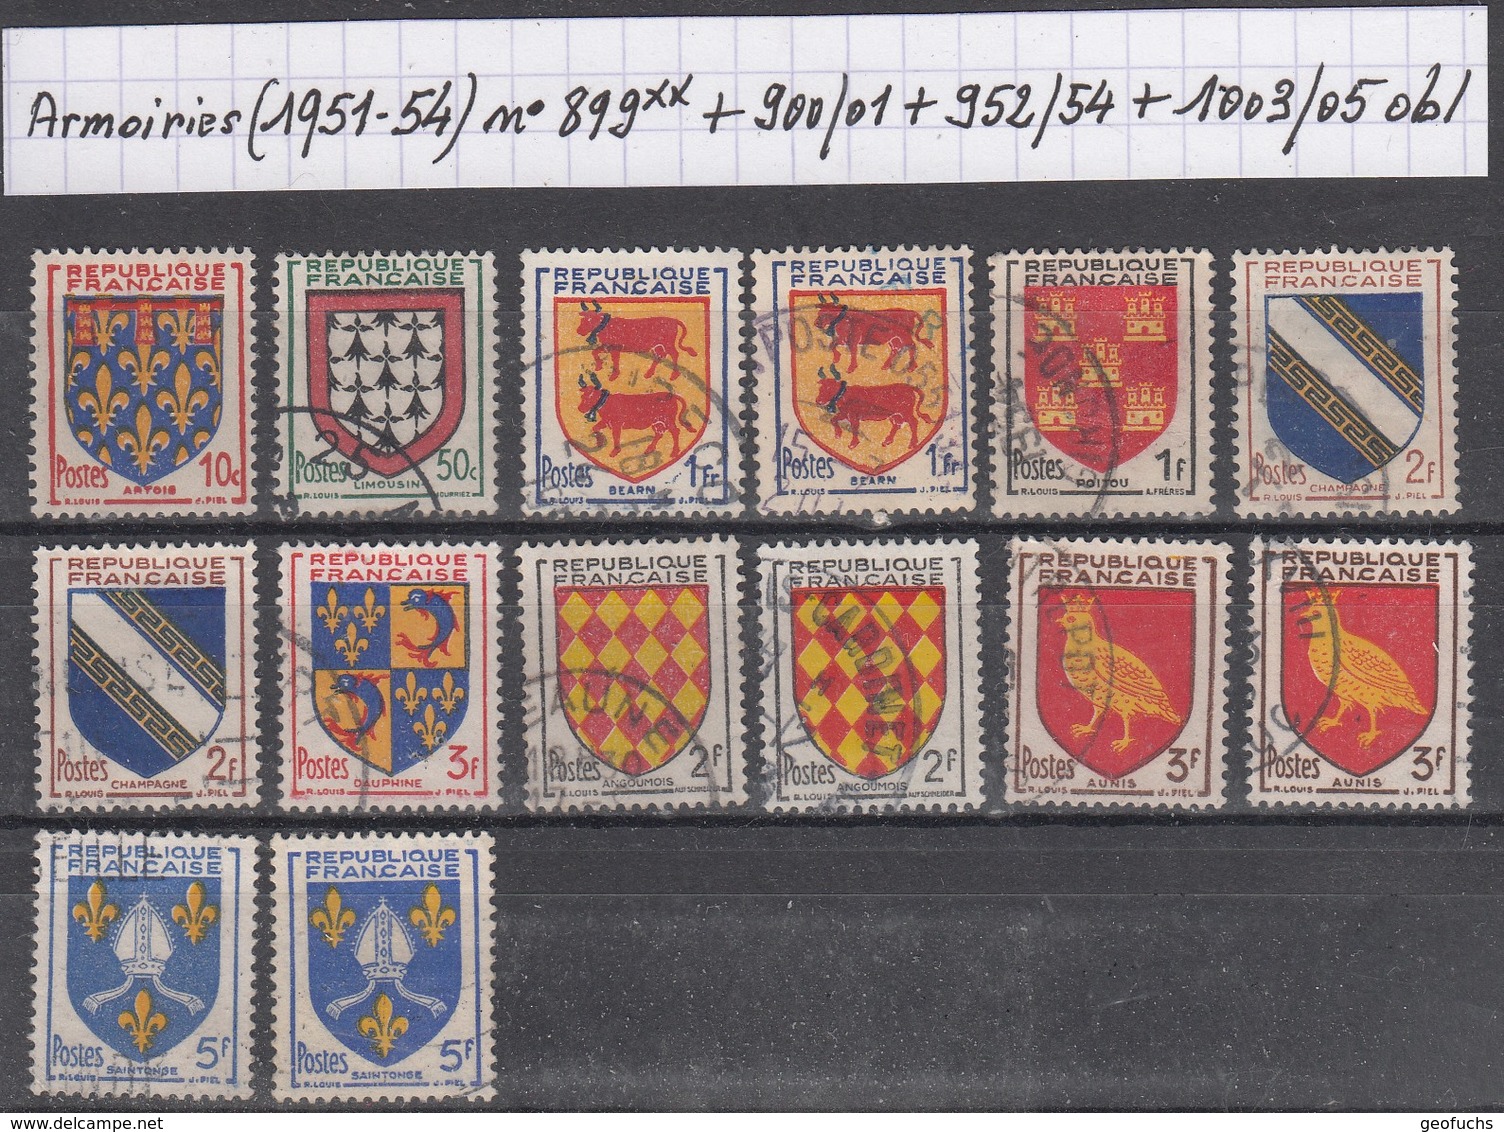 France Armoiries (1951-54) Y/T N° 899** + 900/901 + 952/954 + 1003/1005 Oblitérés - 1941-66 Coat Of Arms And Heraldry